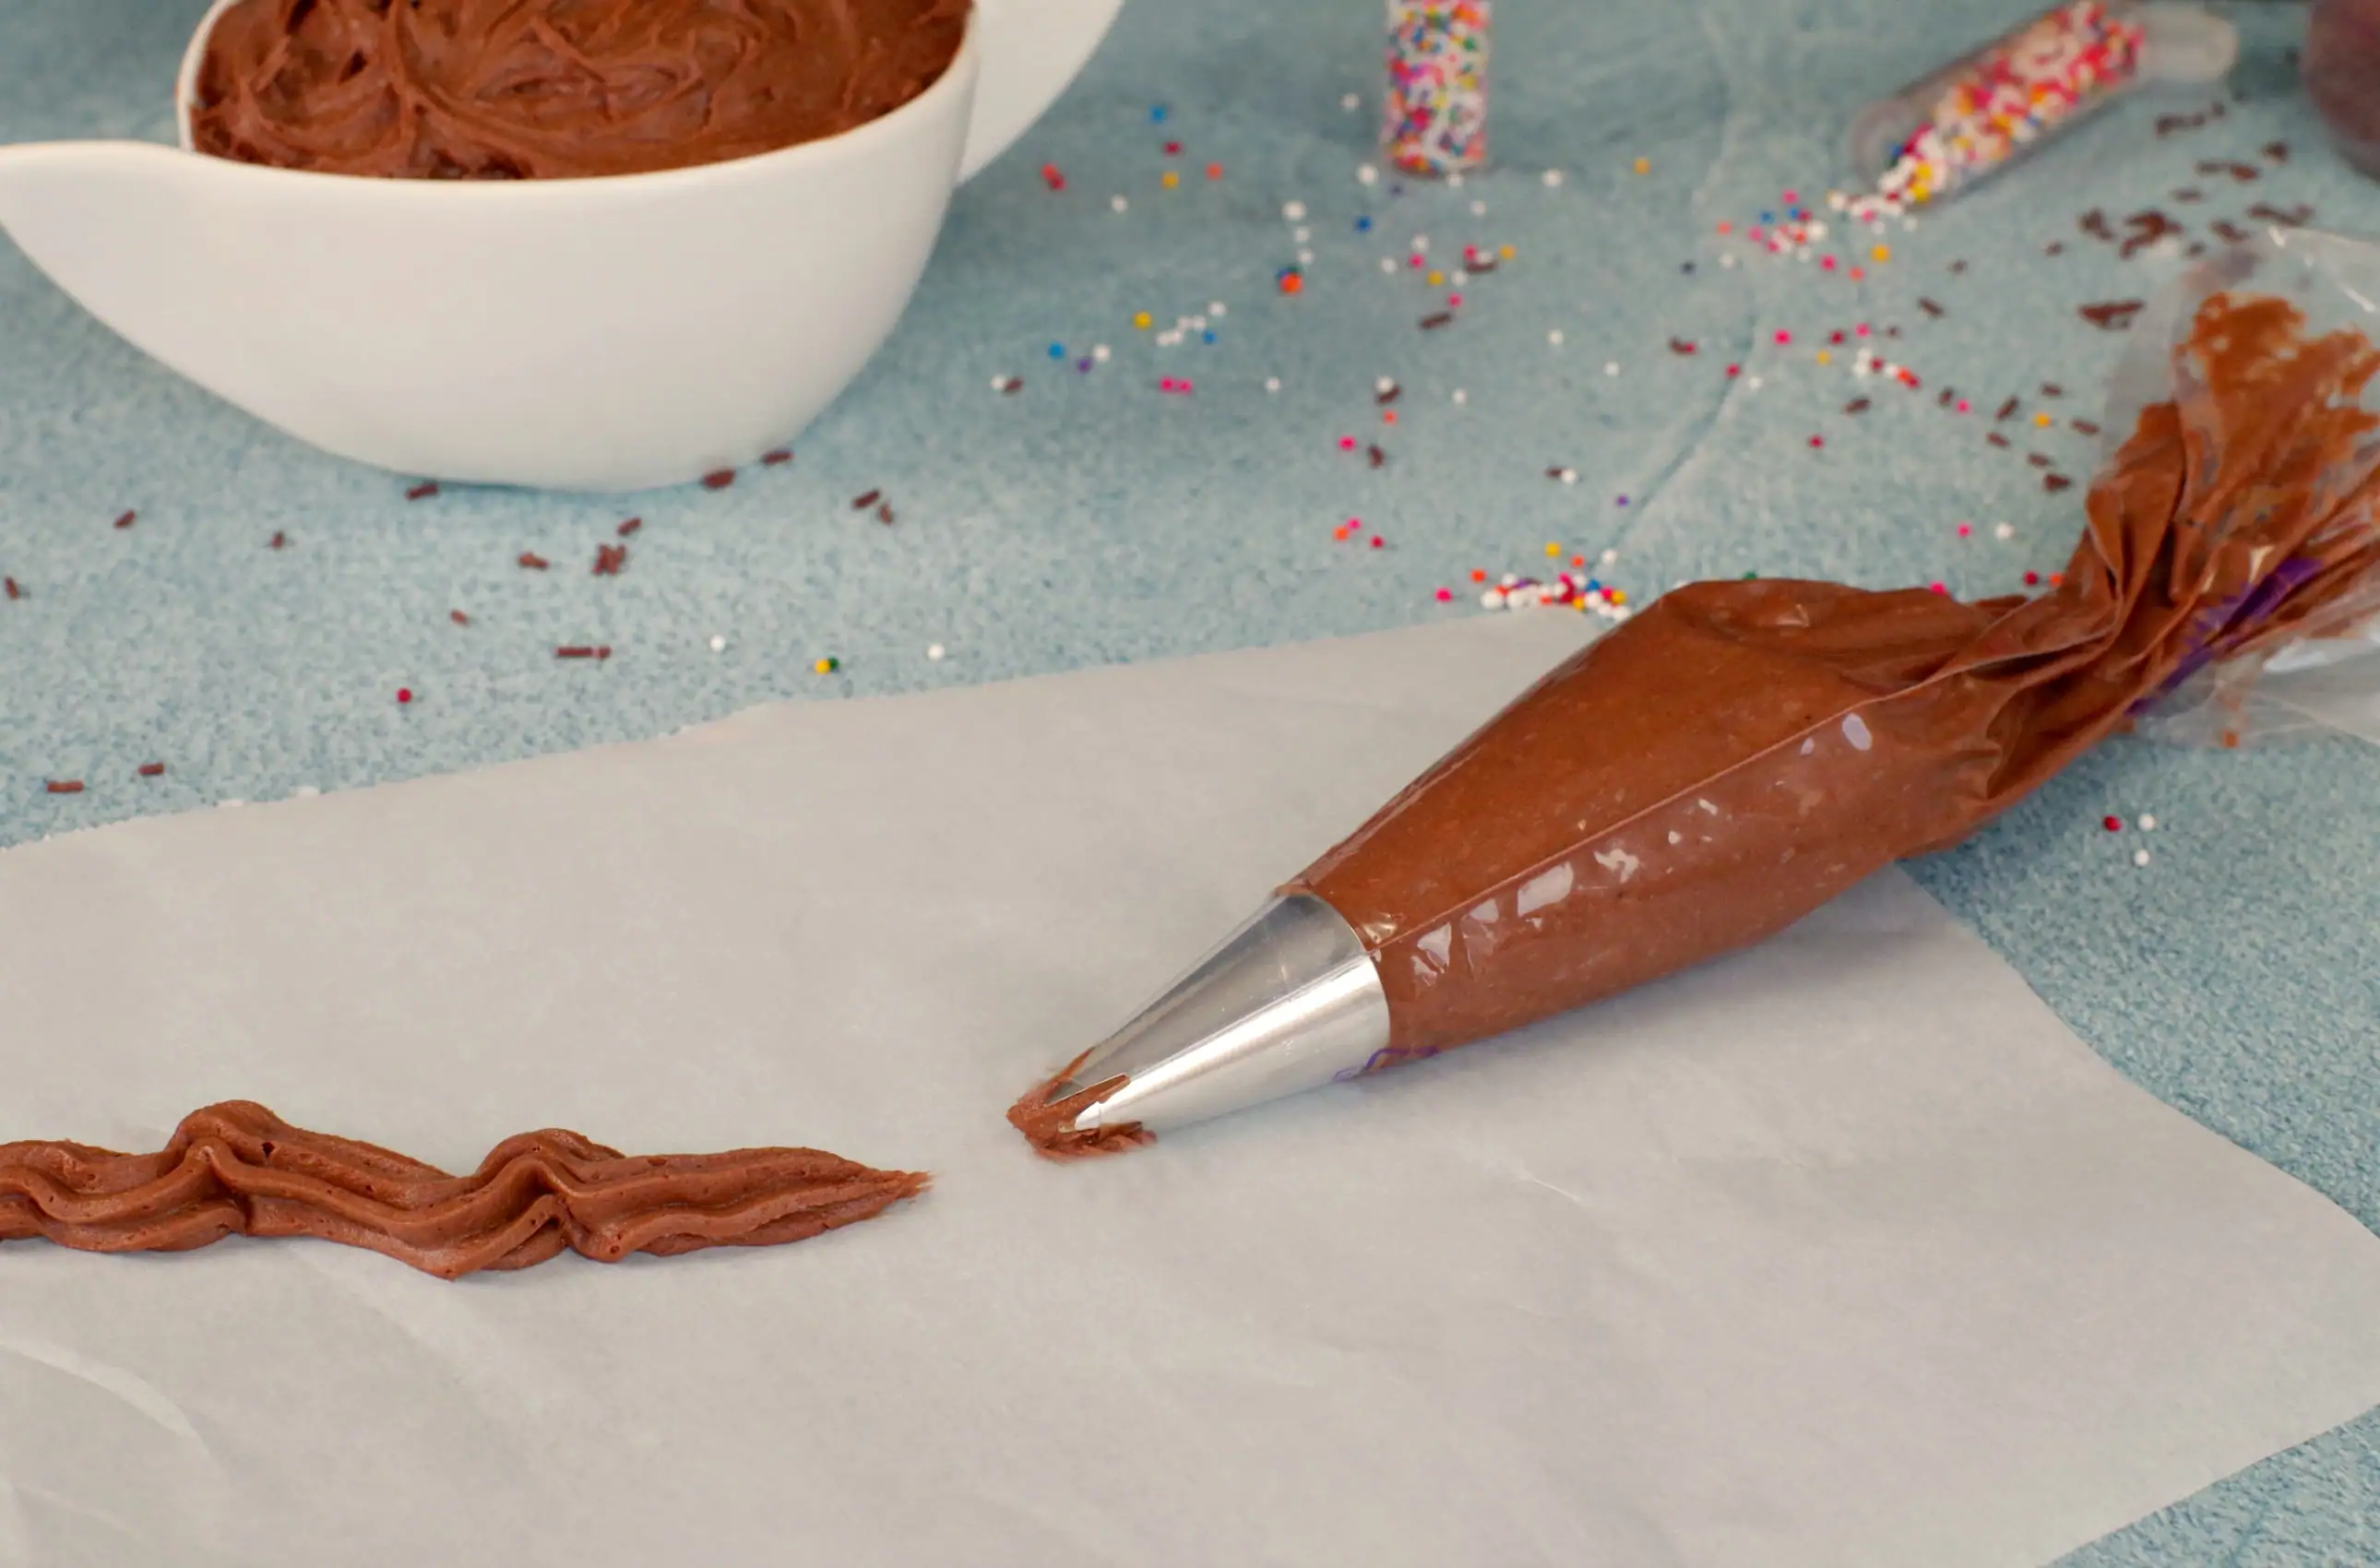 Chocolate frosting in pastry bag on parchment paper with line of frosting on top